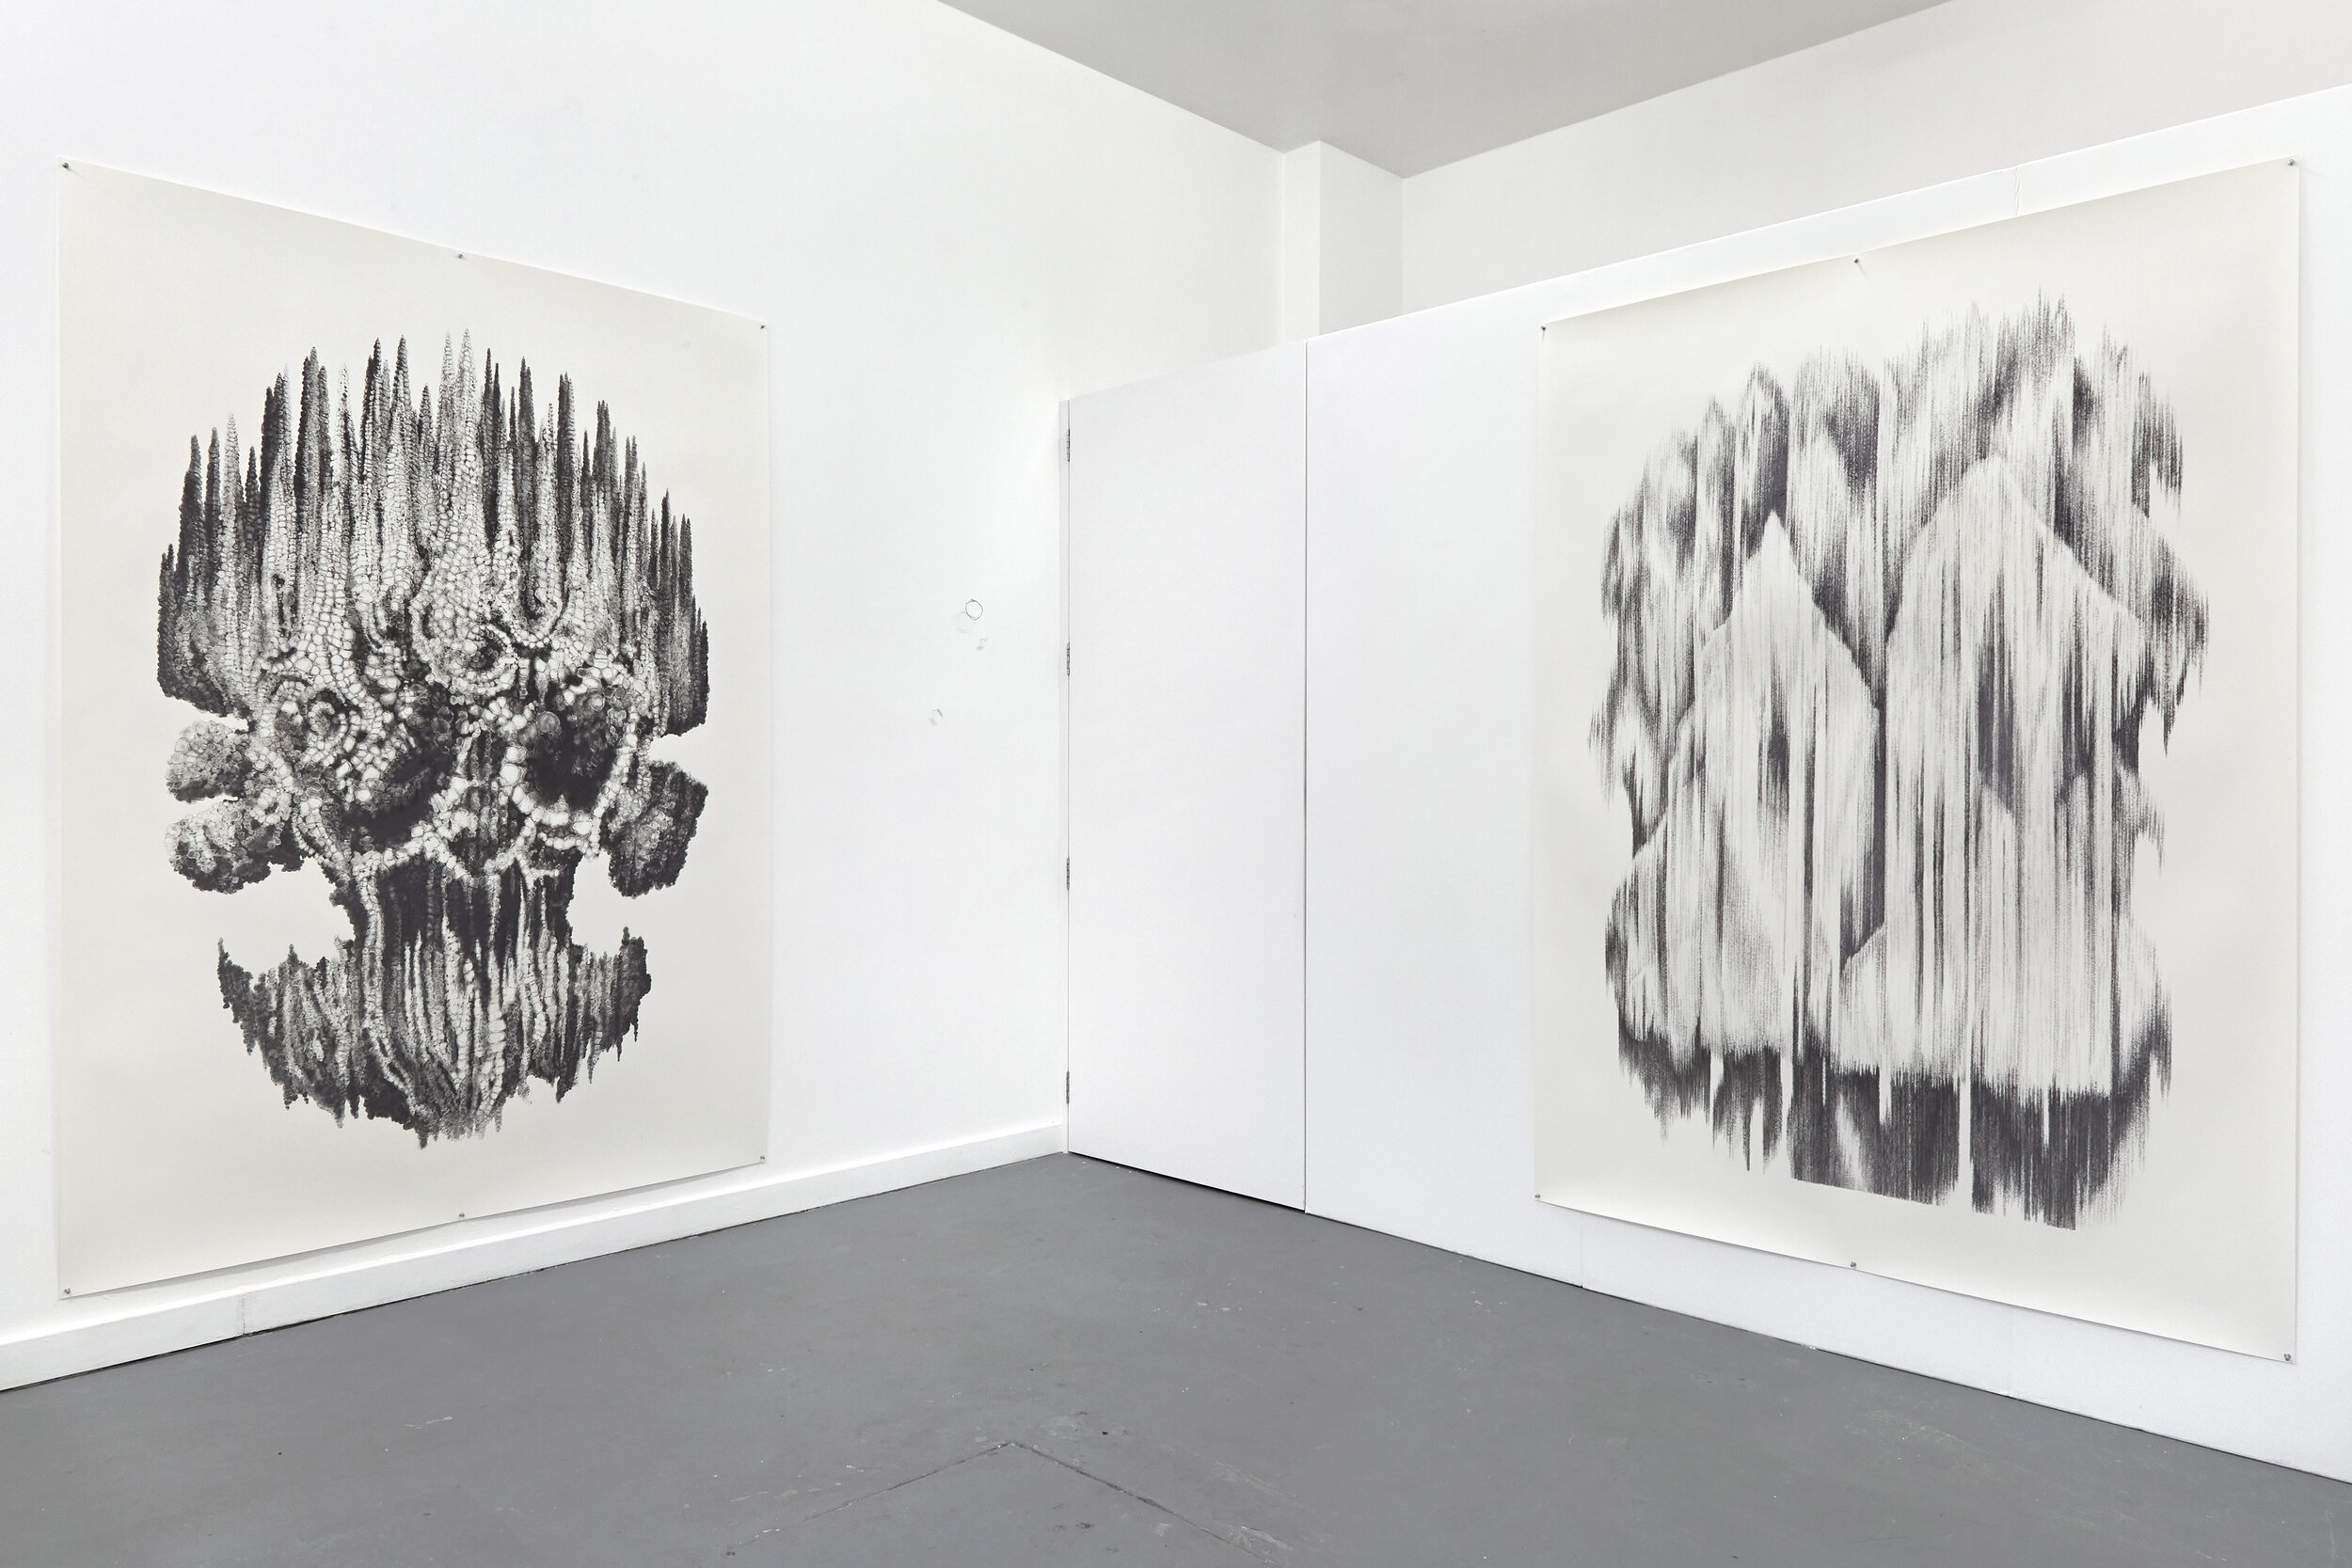  Installation view of ‘Floating Heads’ exhibition at Xxijra Hii project space in Deptford, London, 2021. On the left: ‘Oiwa’, pencil on paper, 231.5 x 171cm, in the centre (just visible) ‘Motes’, wire and clay, dimensions variable but all tiny, on th